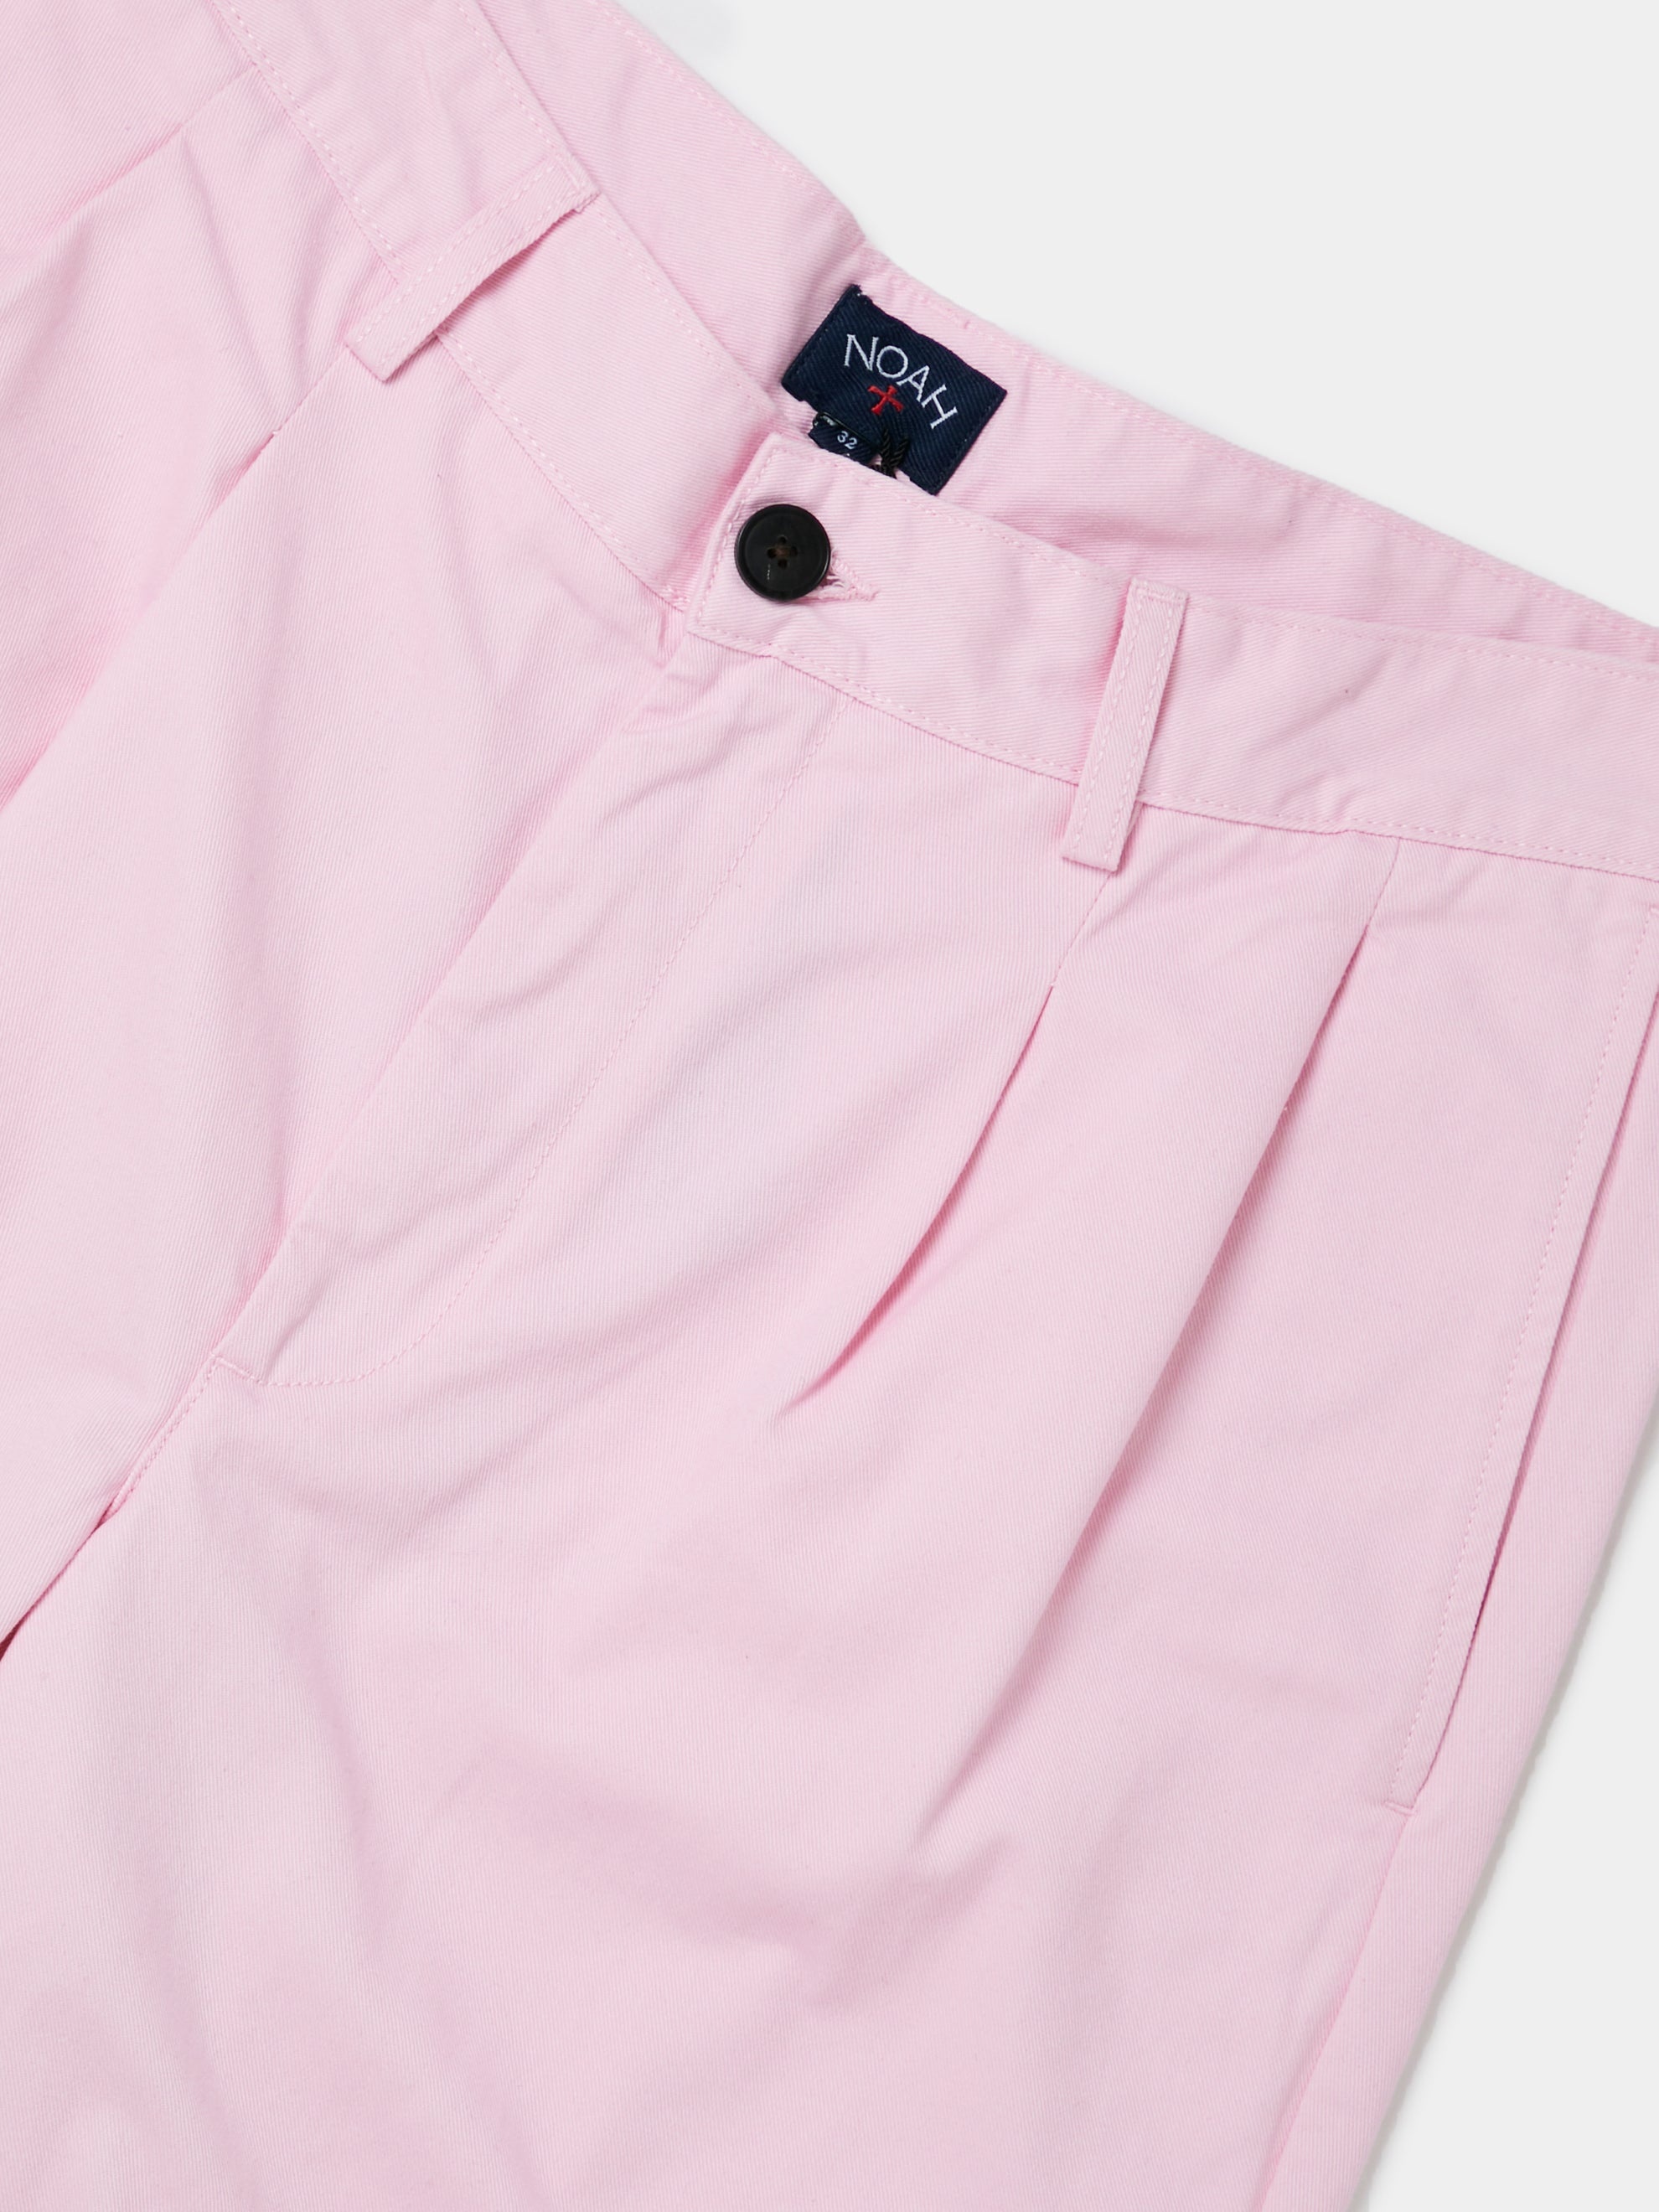 TWILL DOUBLE-PLEAT PANTS (PINK) - 8